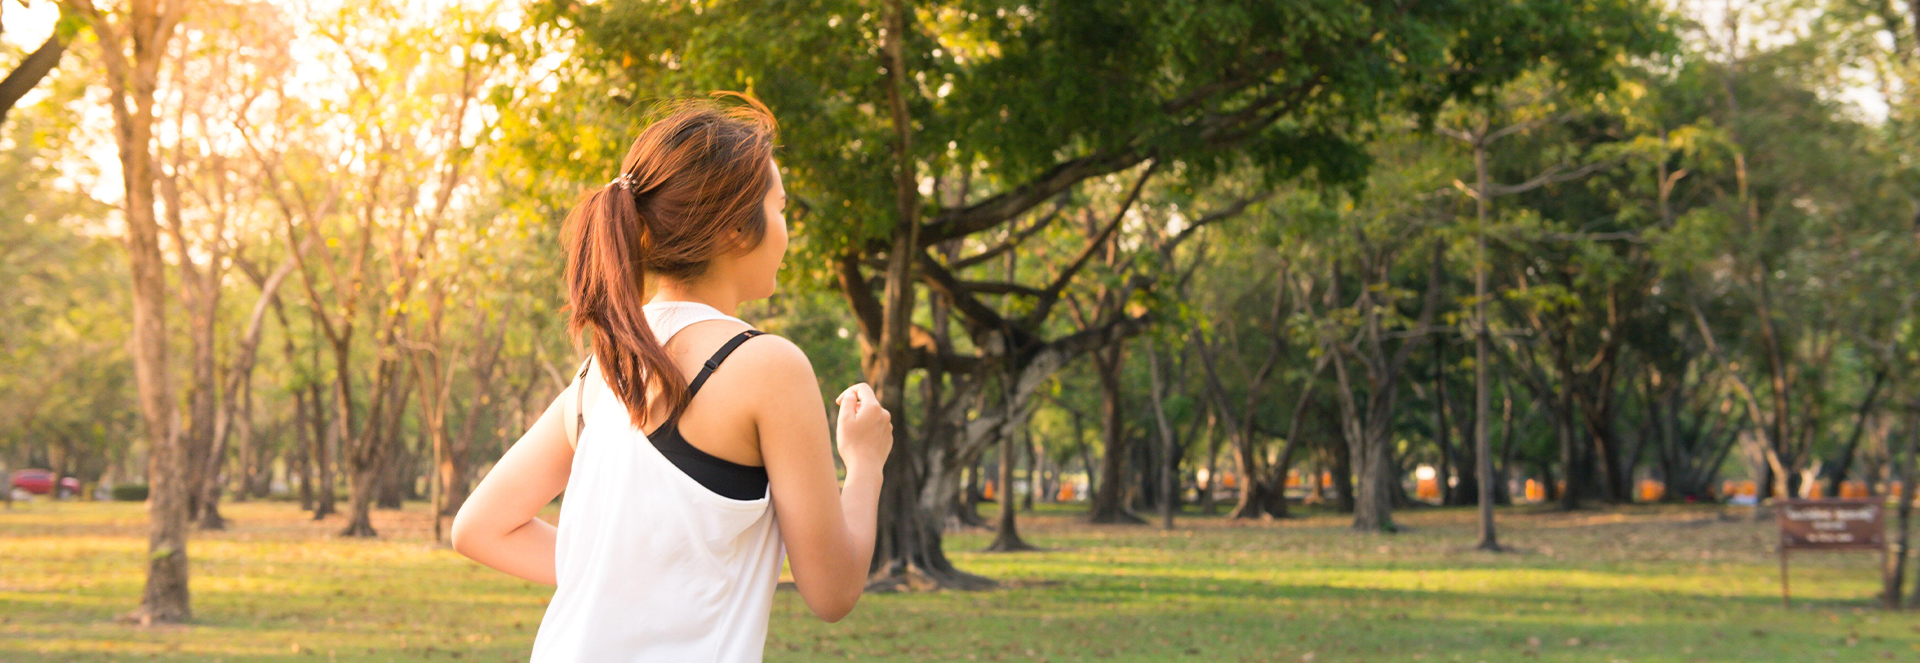 A woman in athletic apparel is seen jogging through a wooded area.